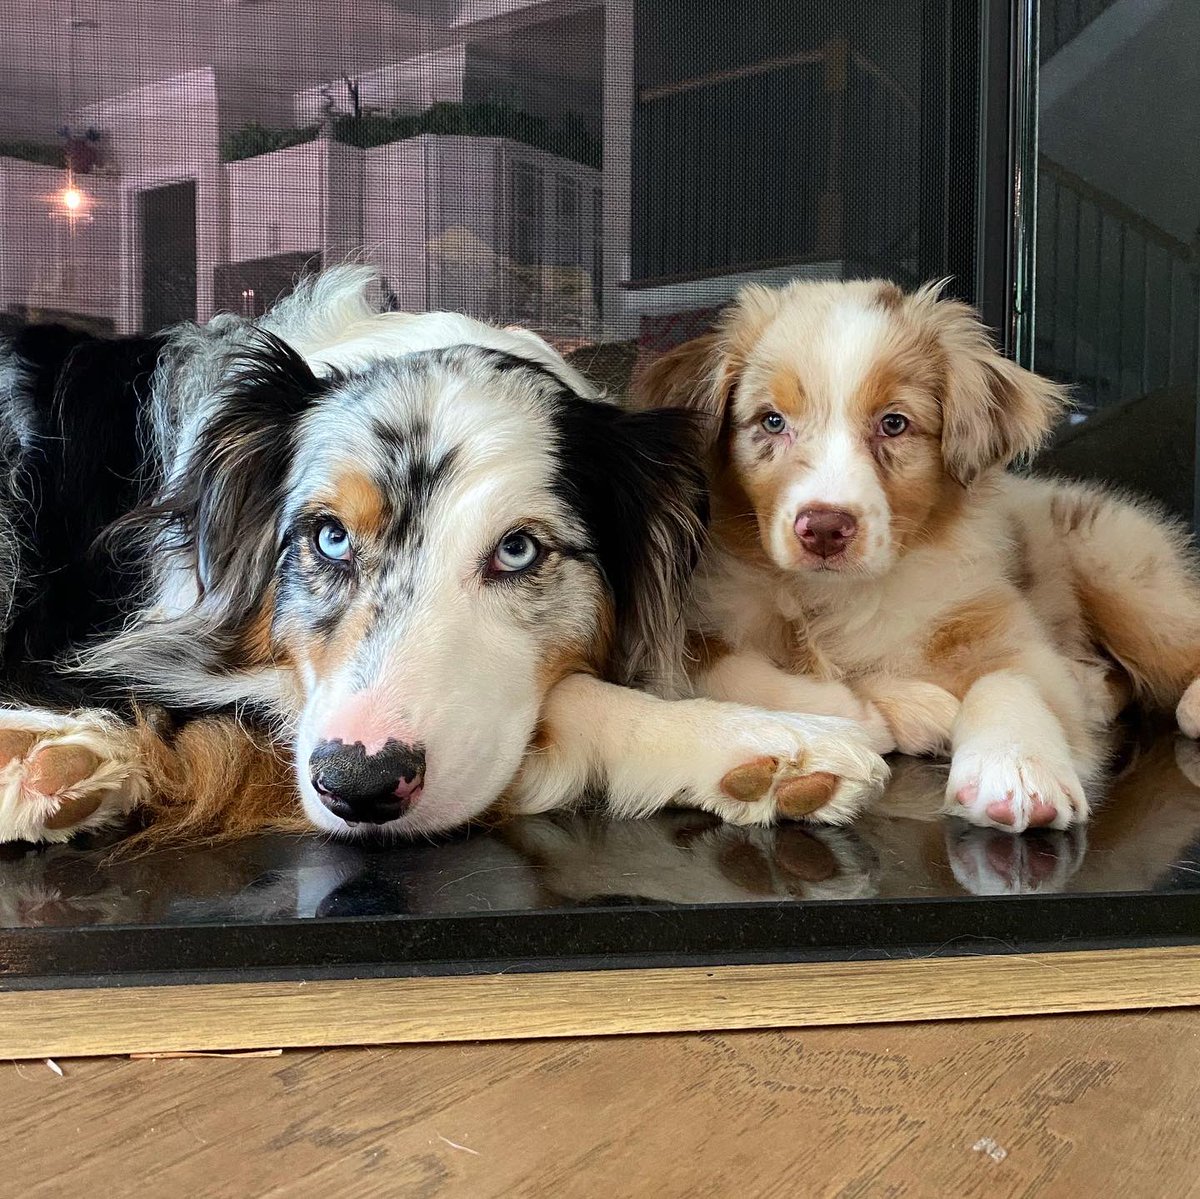 I can’t with these two.
😍😍
They melt my heart.
🥰🥰
#twinsies #toocuteforwords #aussies #dogsoftwitter